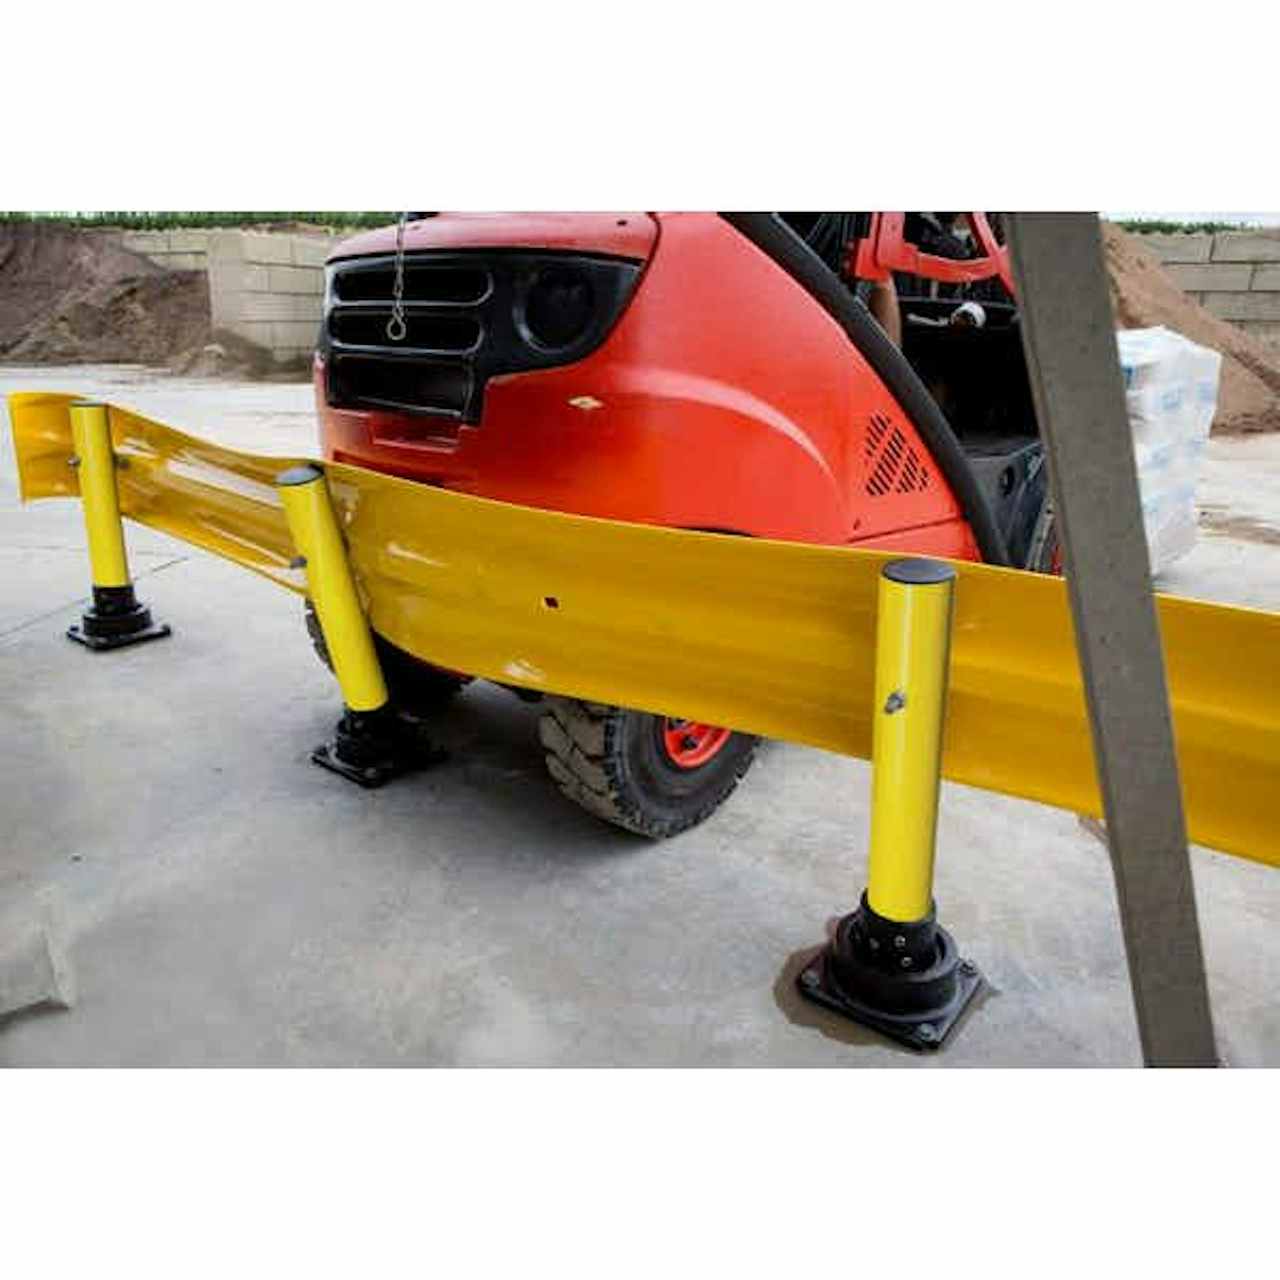 safety barriers